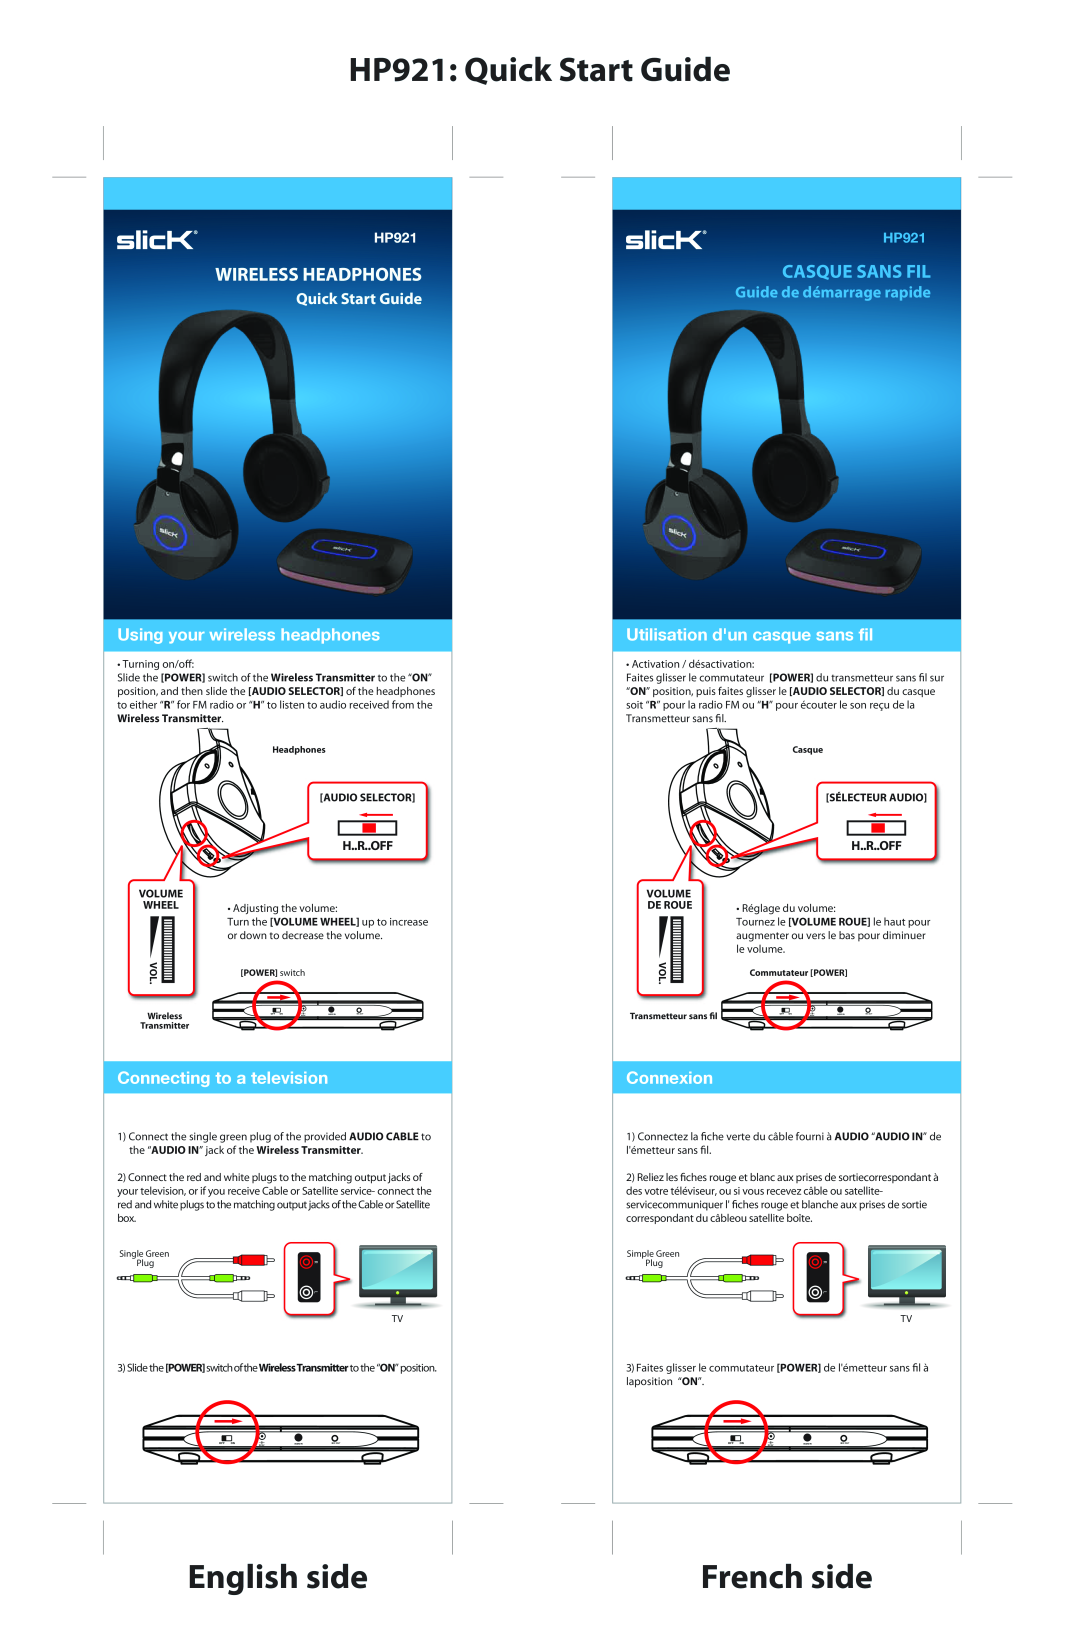 Slick quick start HP921 Quick Start Guide, English side, French side, Wireless Headphones, Casque Sans Fil, Connexion 